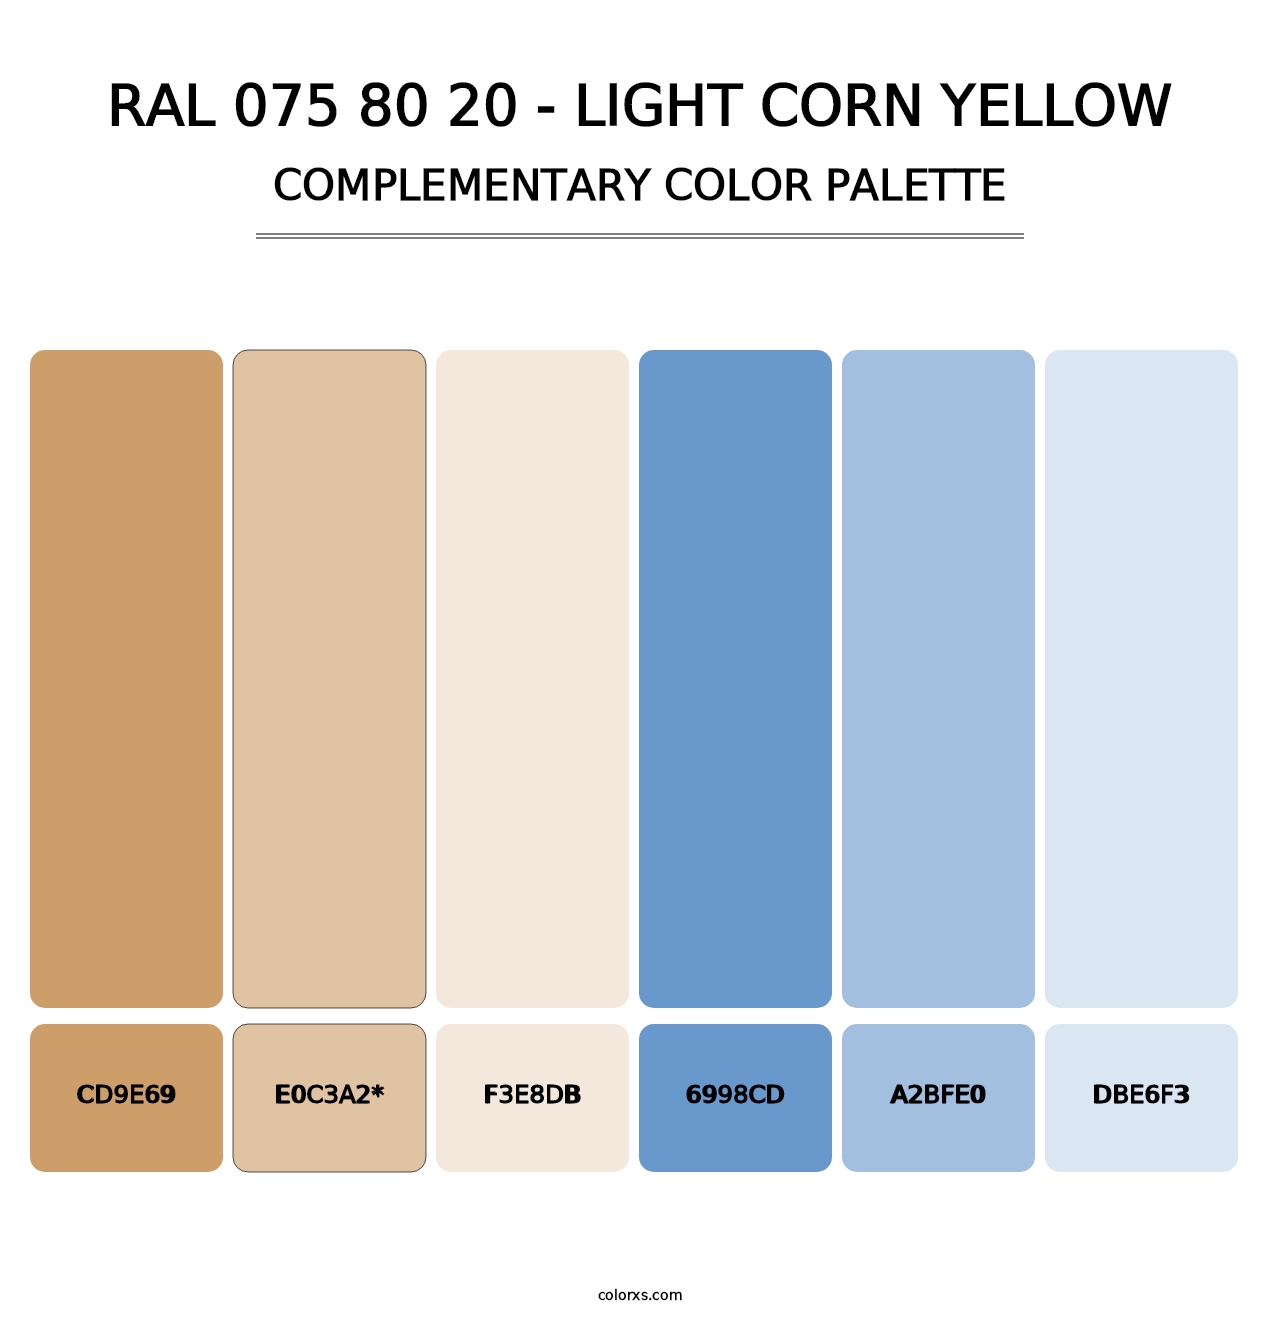 RAL 075 80 20 - Light Corn Yellow - Complementary Color Palette